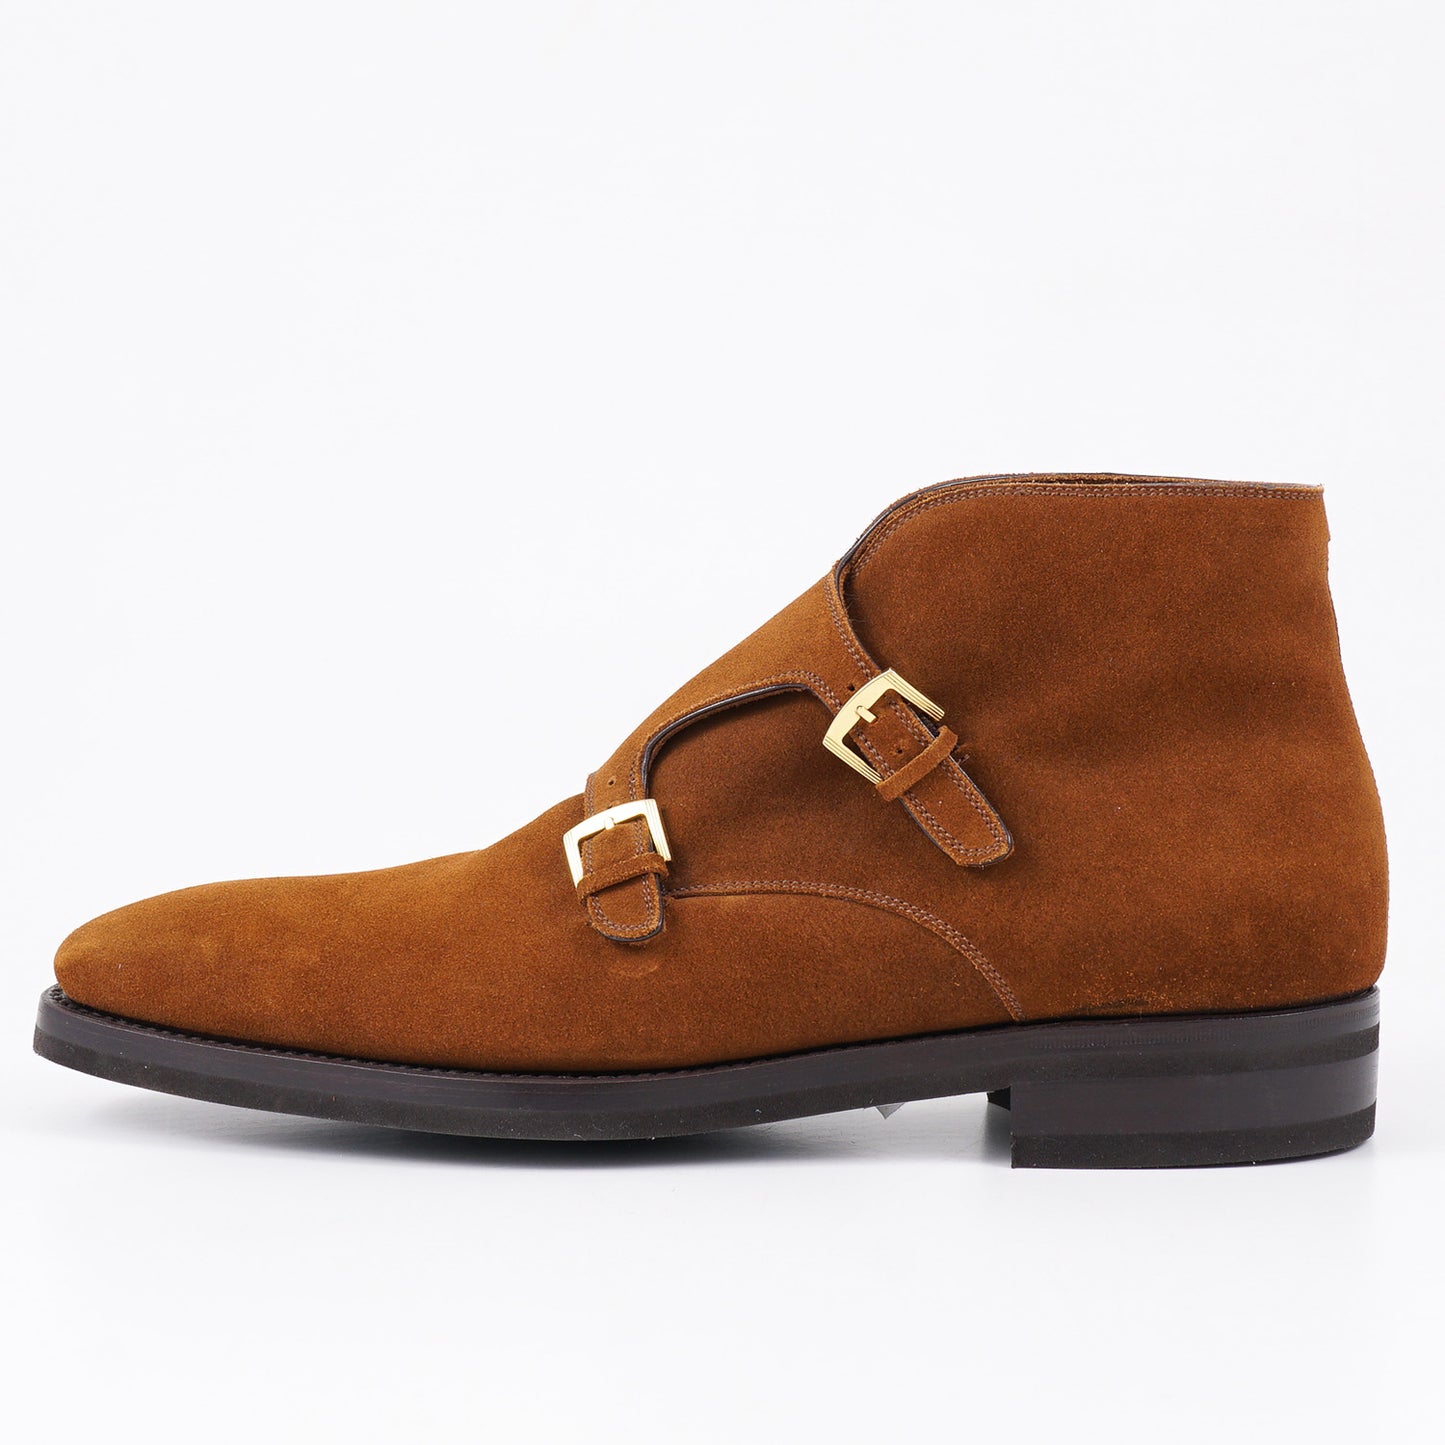 Kiton Shearling-Lined Suede Ankle Boots - Top Shelf Apparel